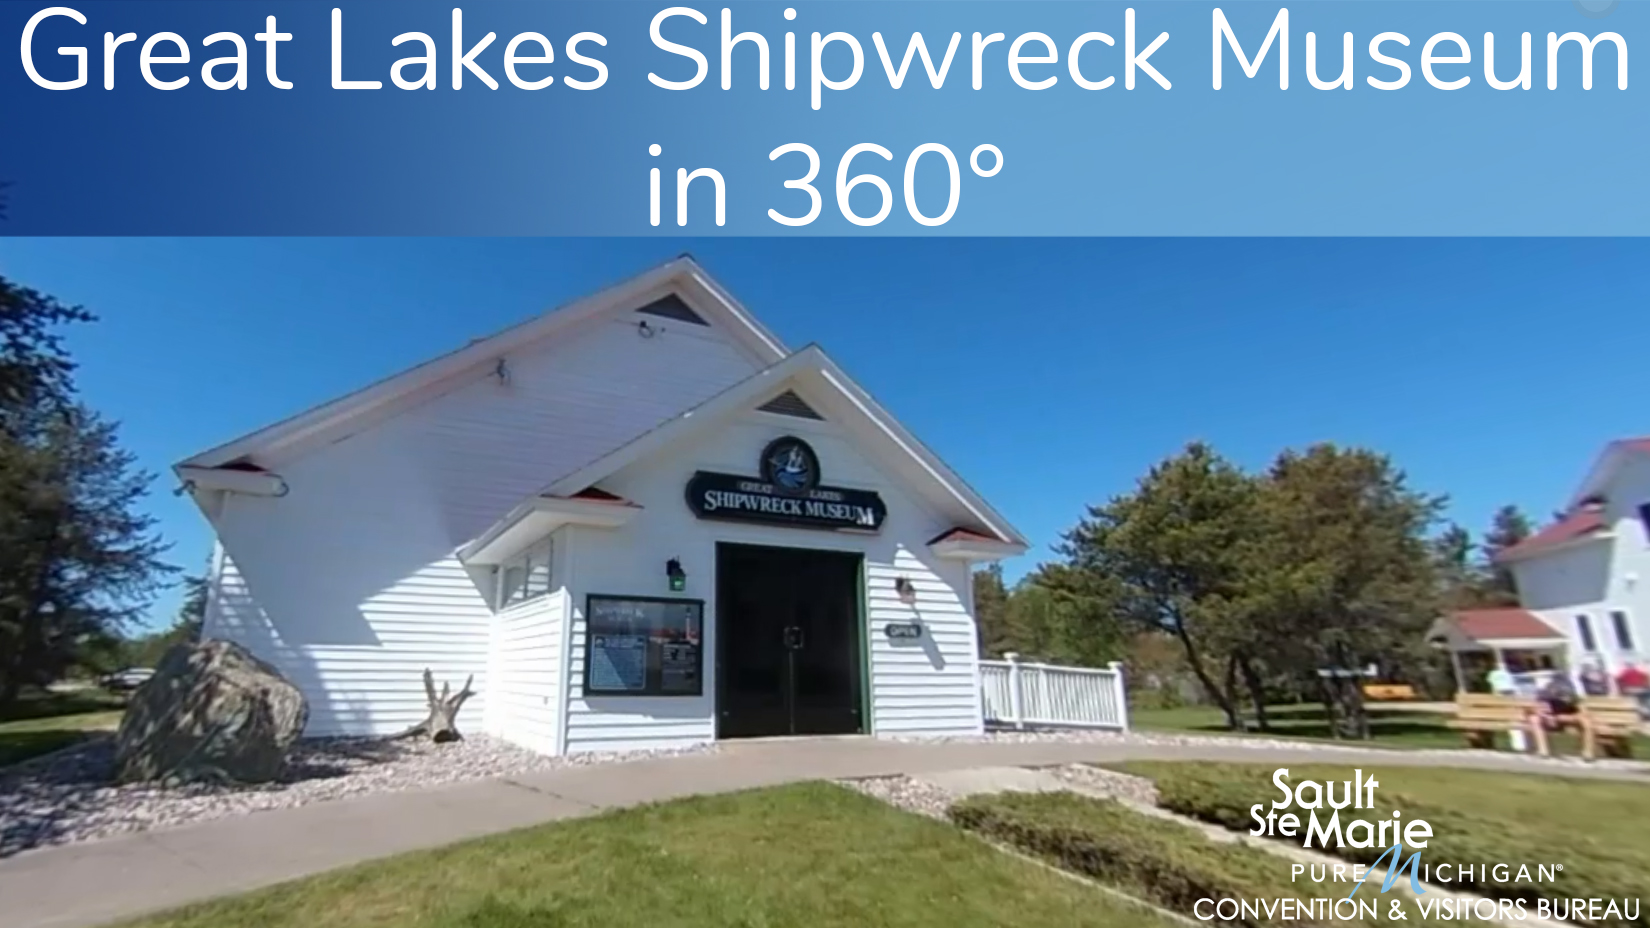 Great Lakes Shipwreck Museums